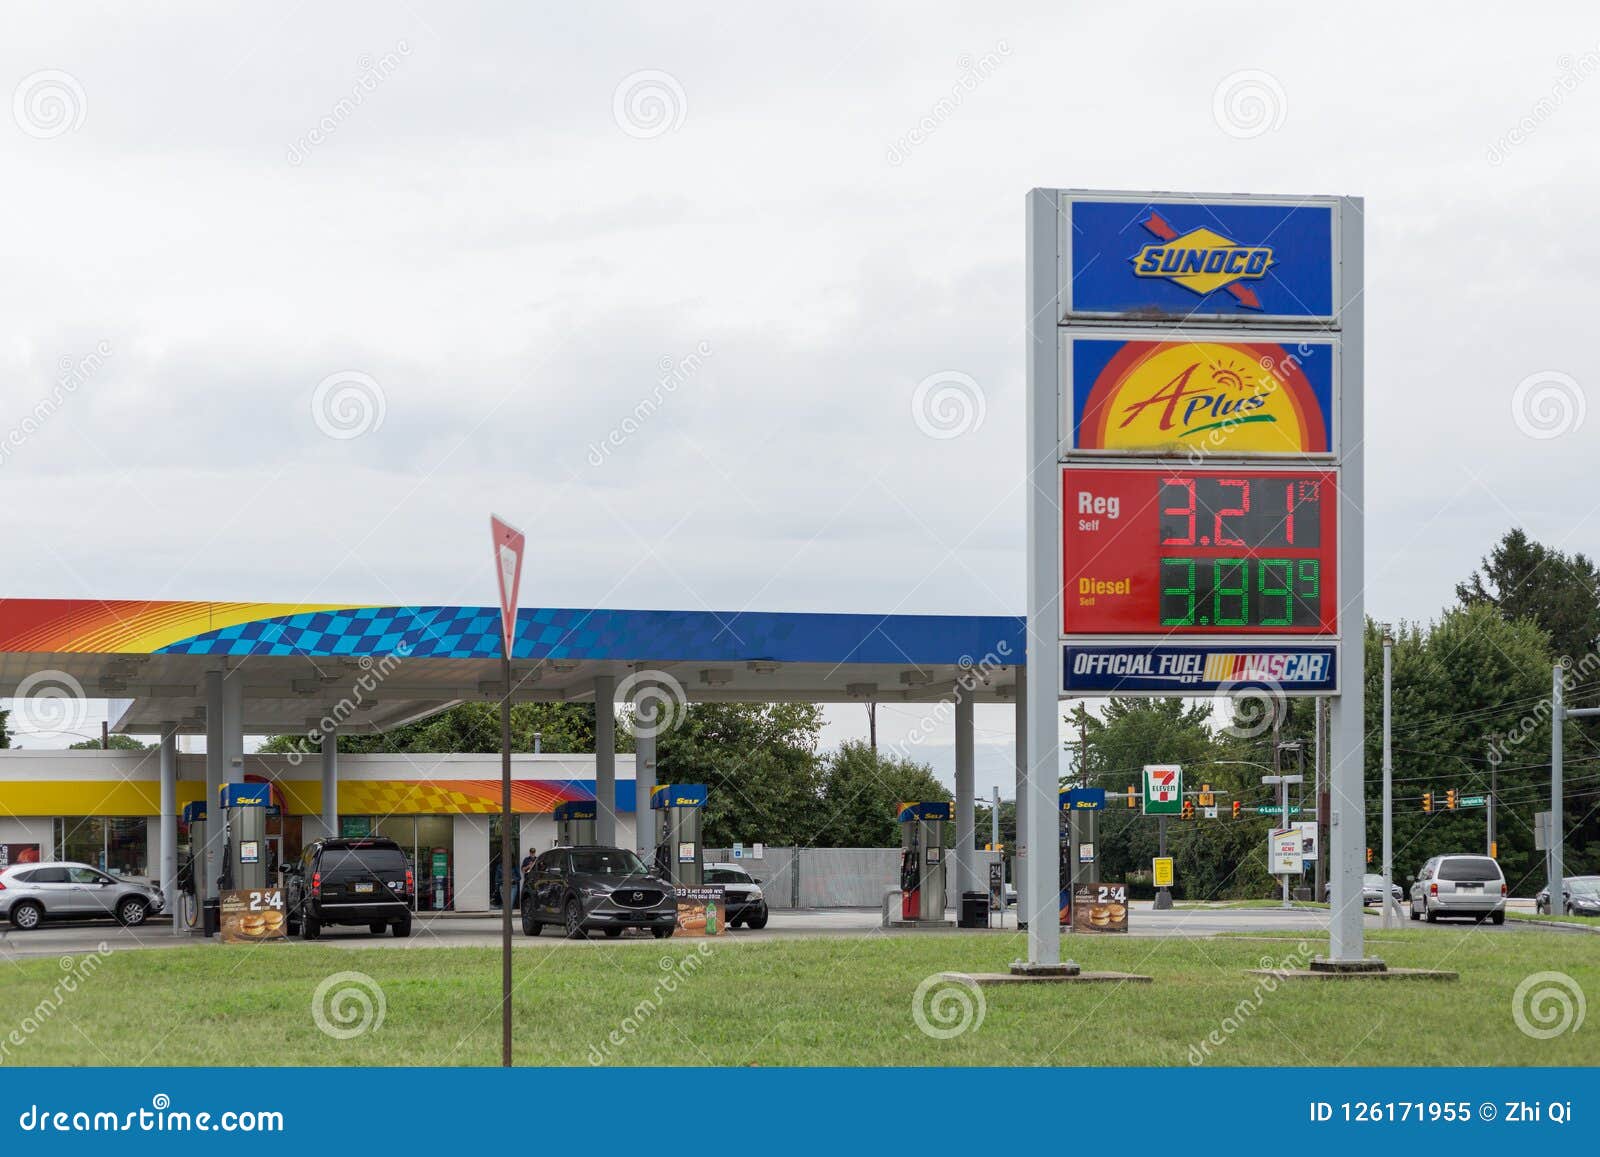 scale Sunoco gas station signs